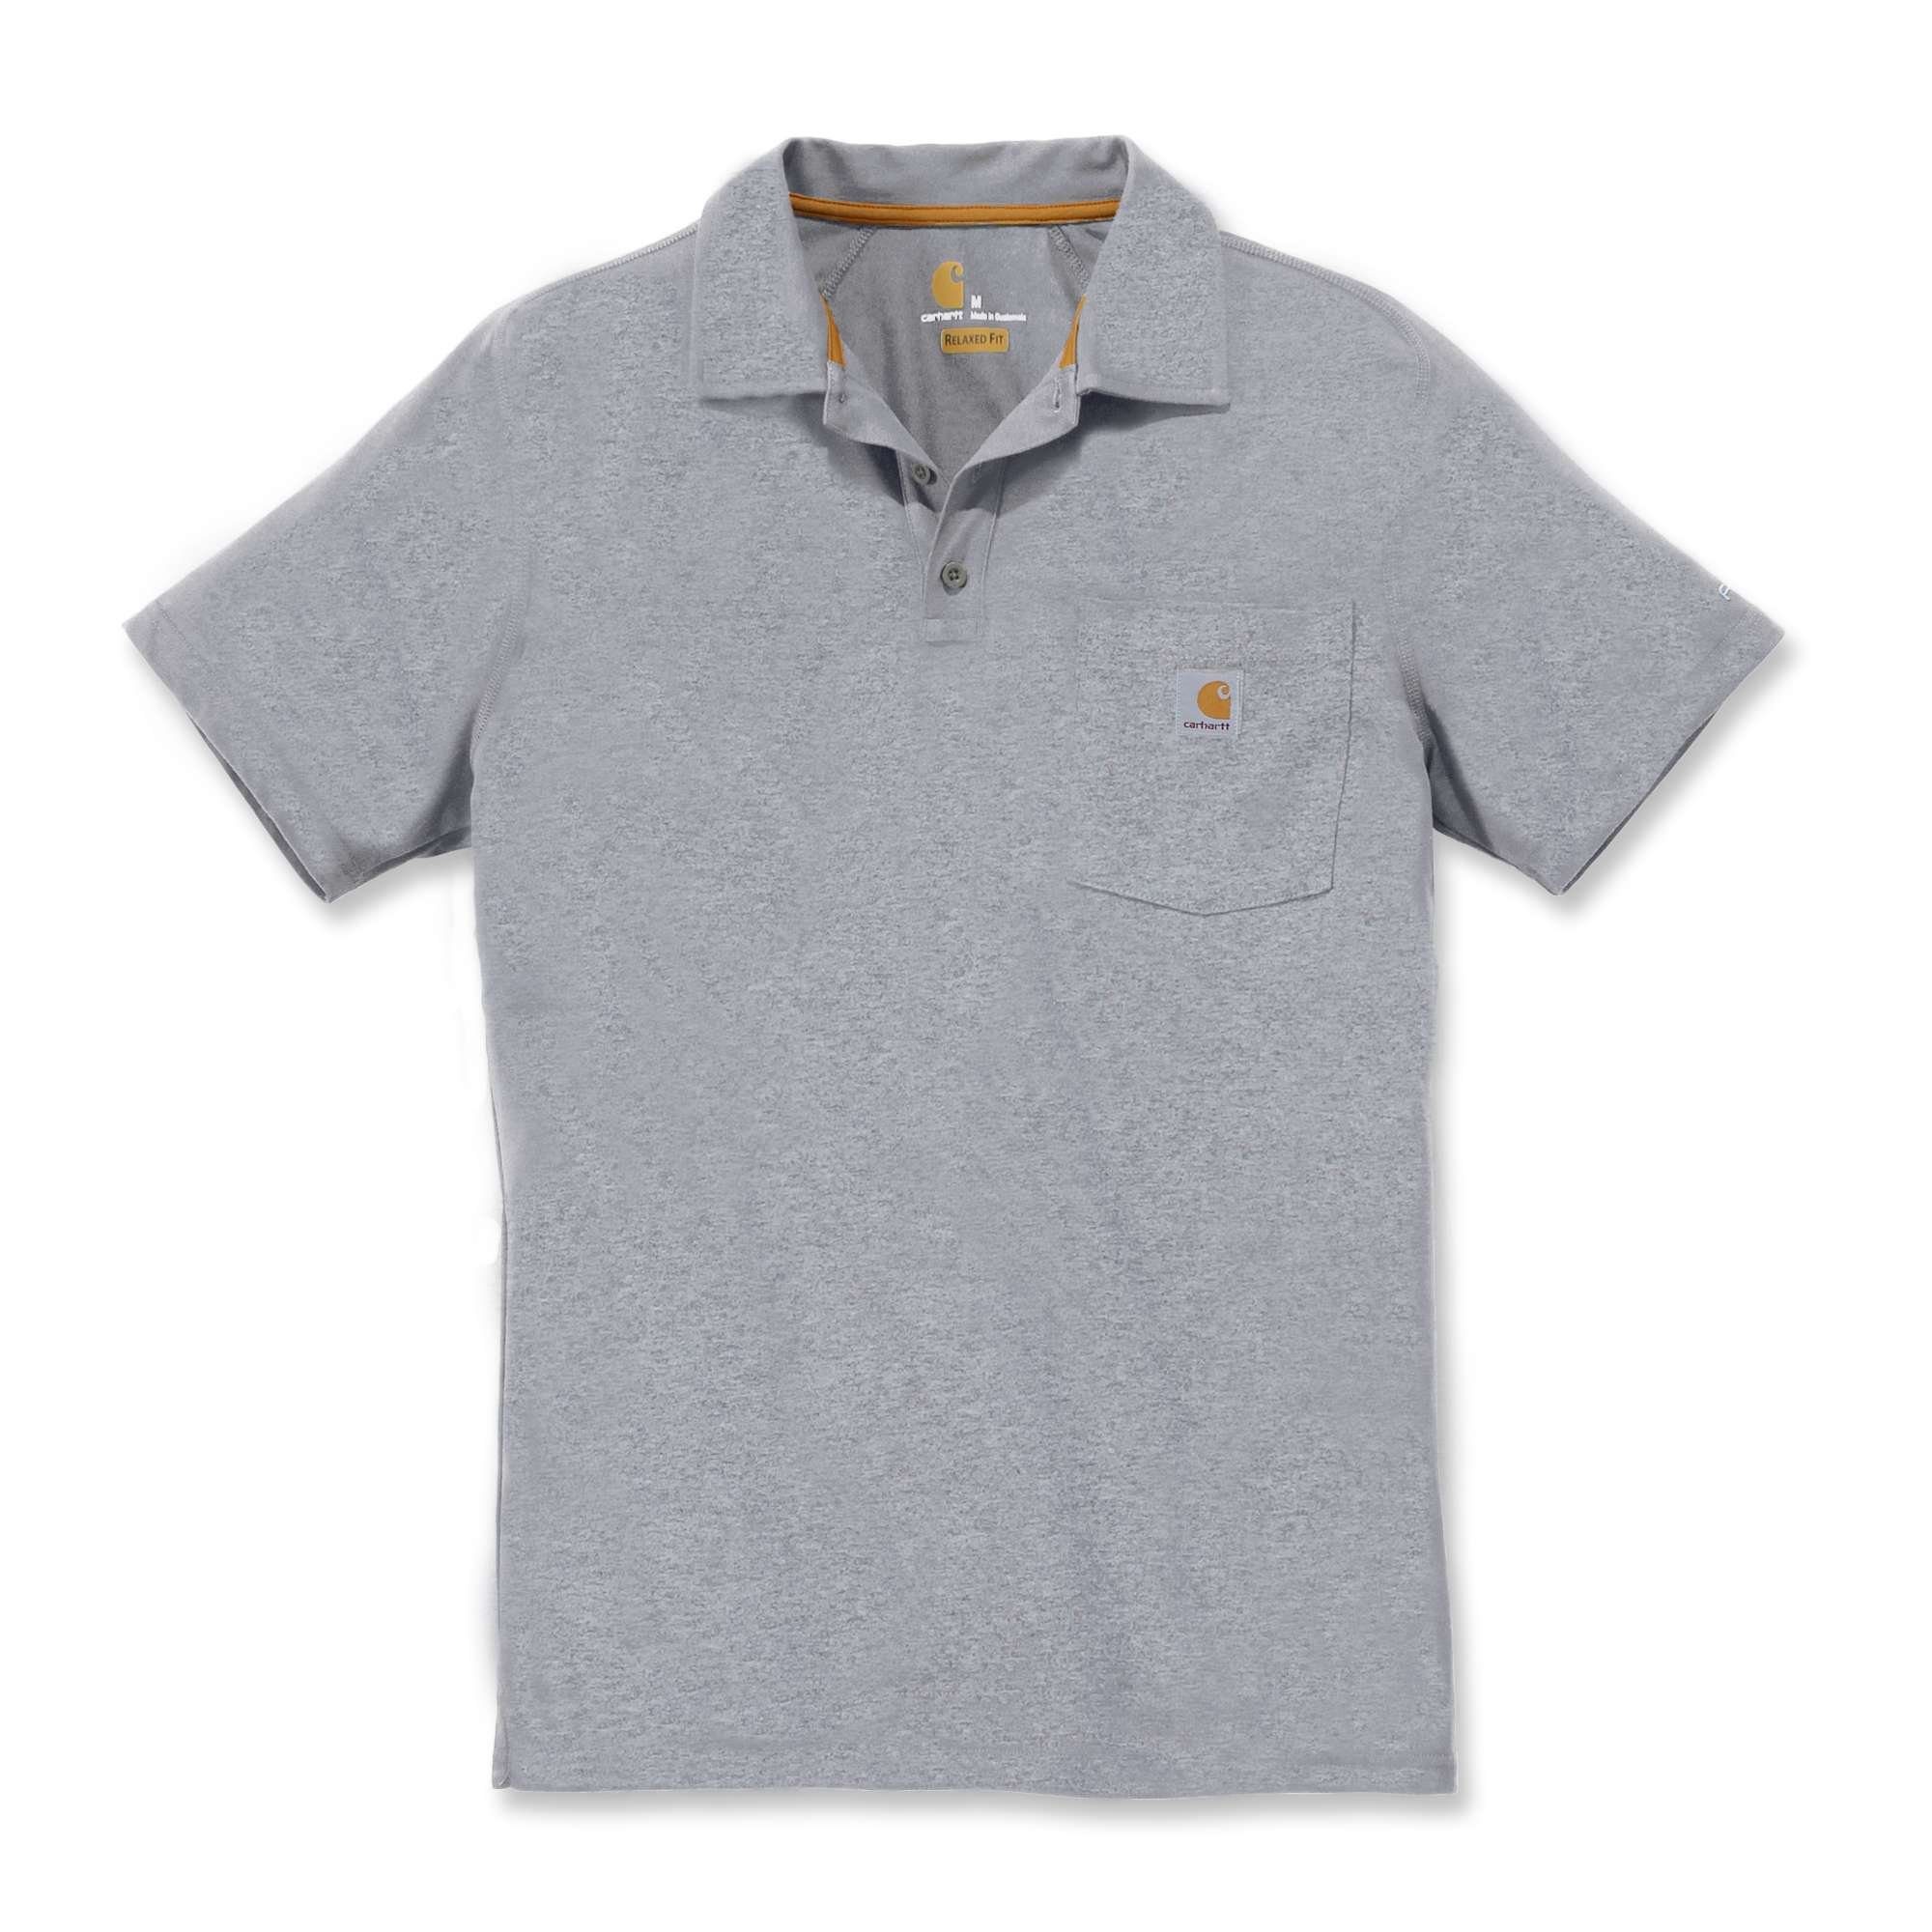 Force Relaxed Carhartt Fit Poloshirt grey heather